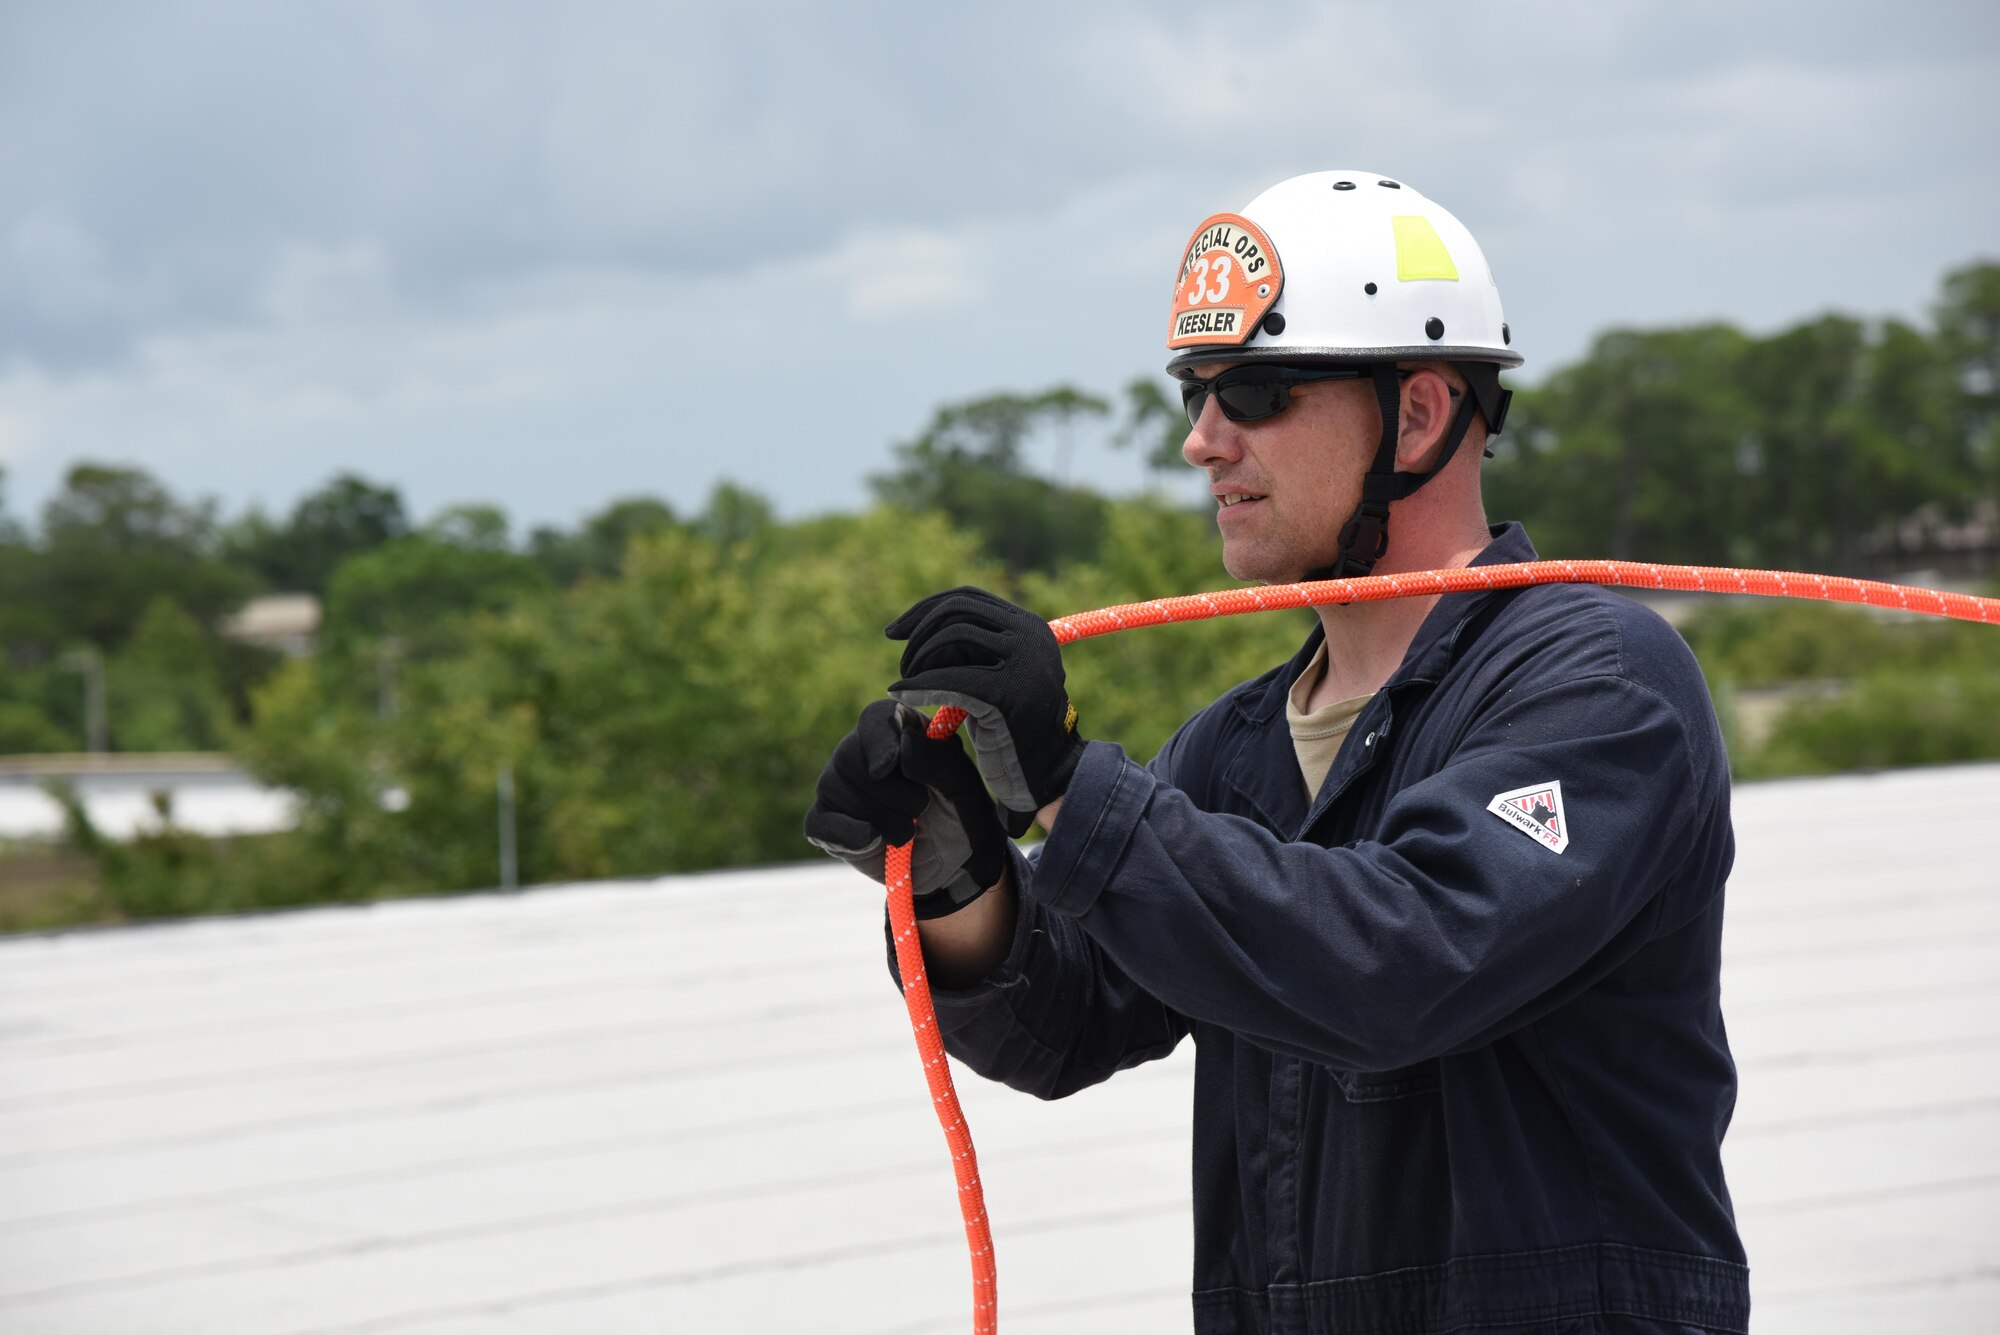 Master Sgt. Brian Malkiewicz, Keesler Firefighter, prepares a rope for a controlled descent exercise atop of the Weather Training Complex during rope rescue operations training June 14, 2017, on Keesler Air Force Base, Miss. Keesler hosted the advanced rescue certification training course, which consisted of confined space rescue, high and low angle rescue and stokes basket rescue operations, for Keesler and Biloxi Firefighters. (U.S. Air Force photo by Kemberly Groue)